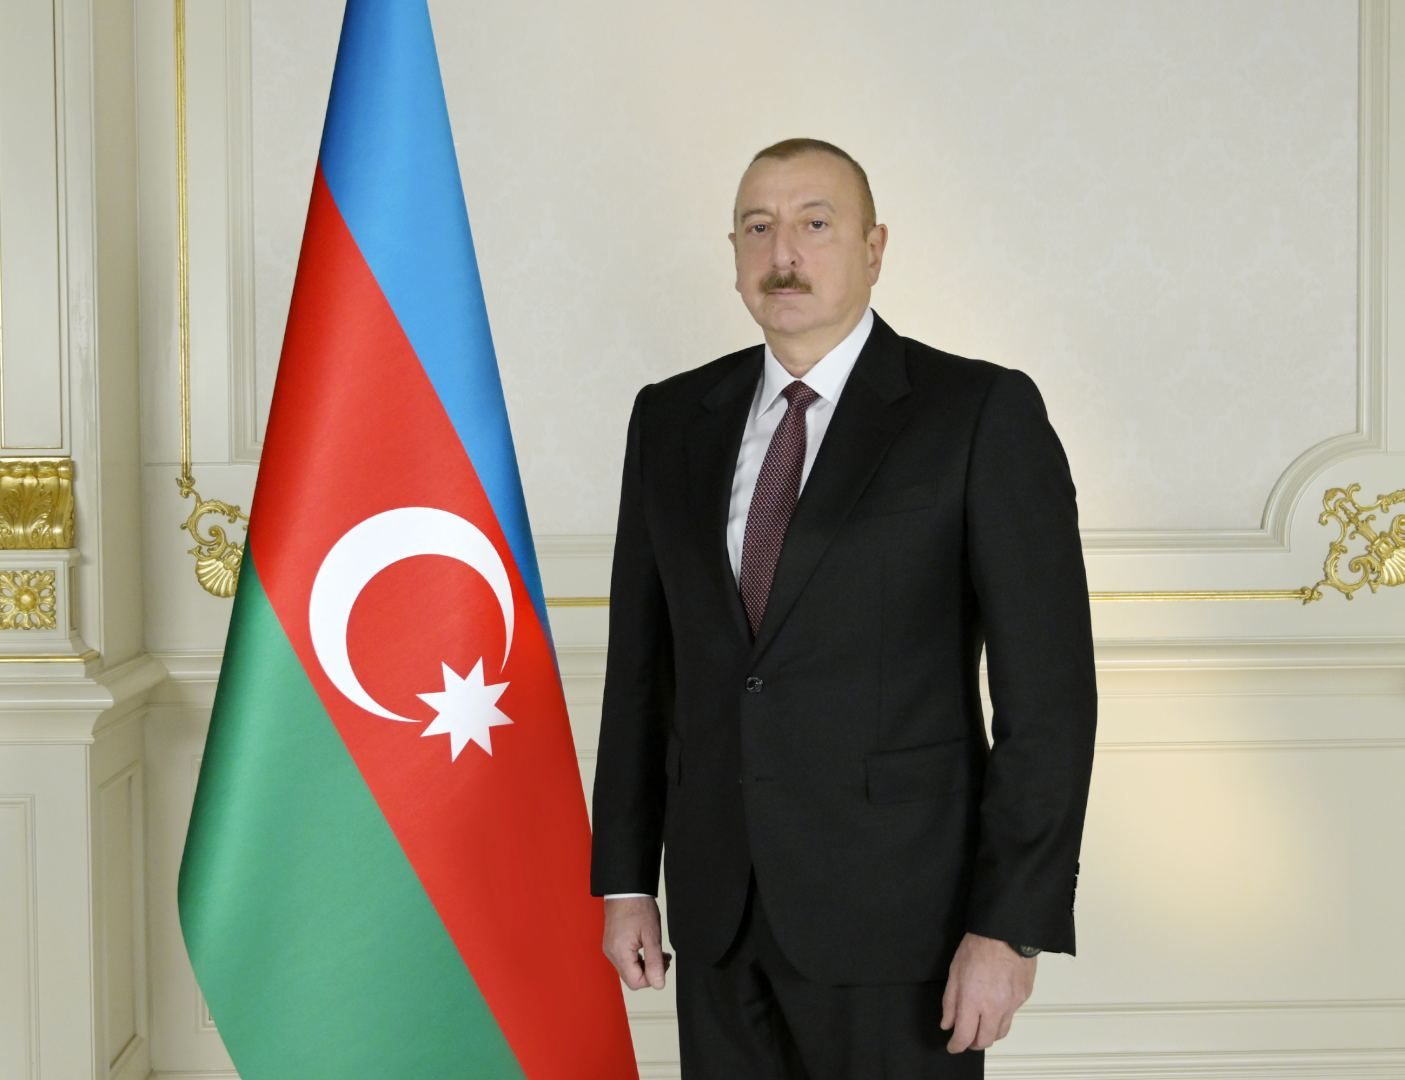 President Ilham Aliyev attends informal dinner organized in honor of CIS heads of state